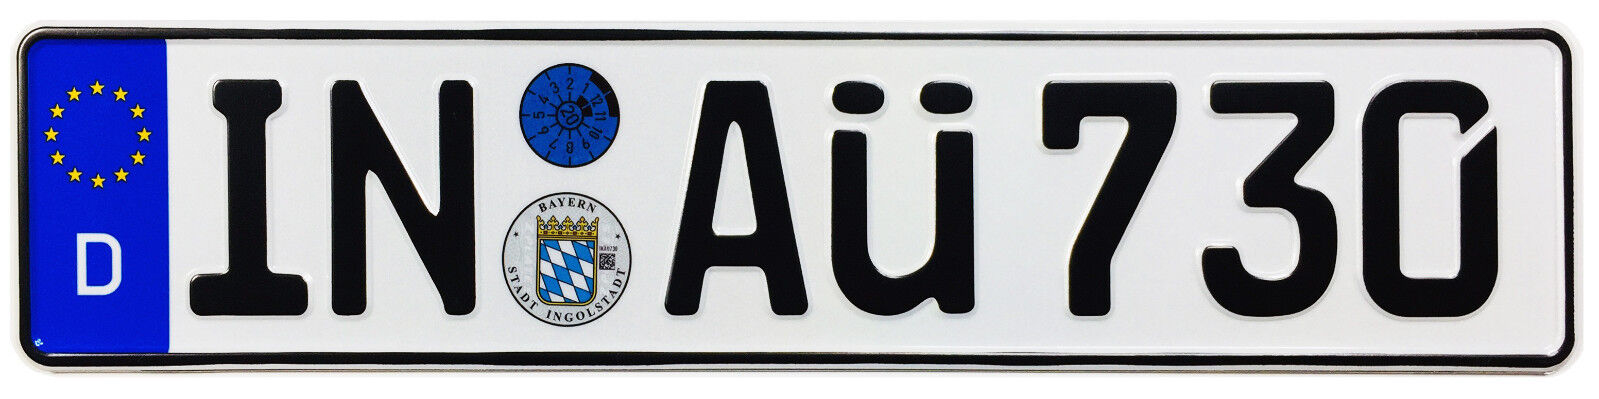 Audi Ingolstadt Rear German License Plate AÜ by Z Plates with Unique Number NEW